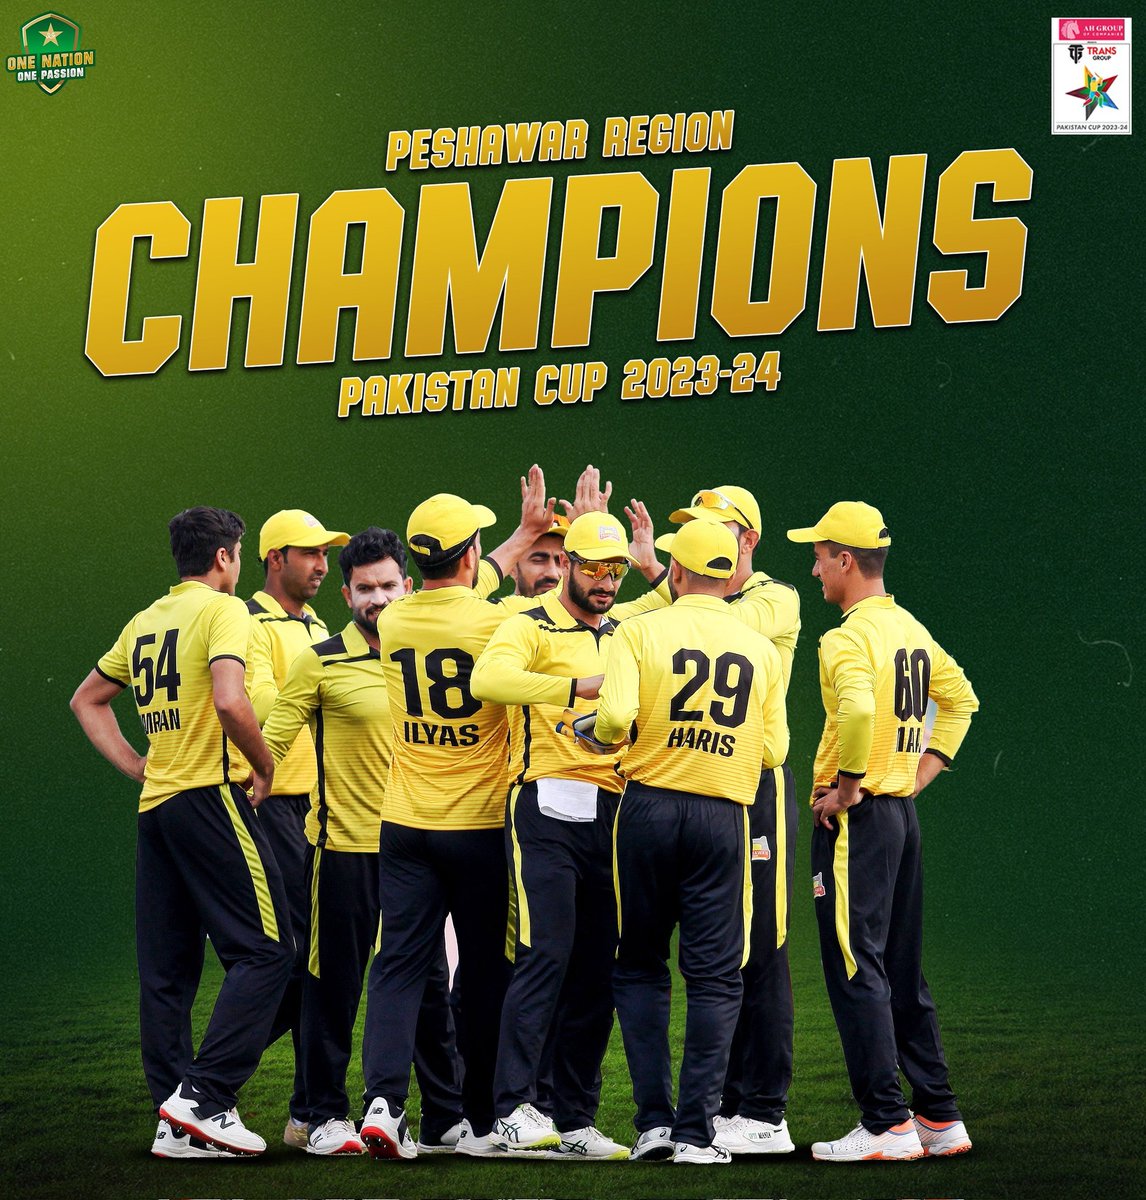 CHAMPIONS 🏆

Peshawar is the new CHAMPIONS of the Pakistan Cup 2023-24 👑

#PakistanCup | #PSHvKHIW

#CWC23Final #INDvsAUSfinal #ICCWorldCupFinal
#WorldCup2023Final #CWC23 #INDvAUS

#SportsEyePK #BSL3 #Subscribe